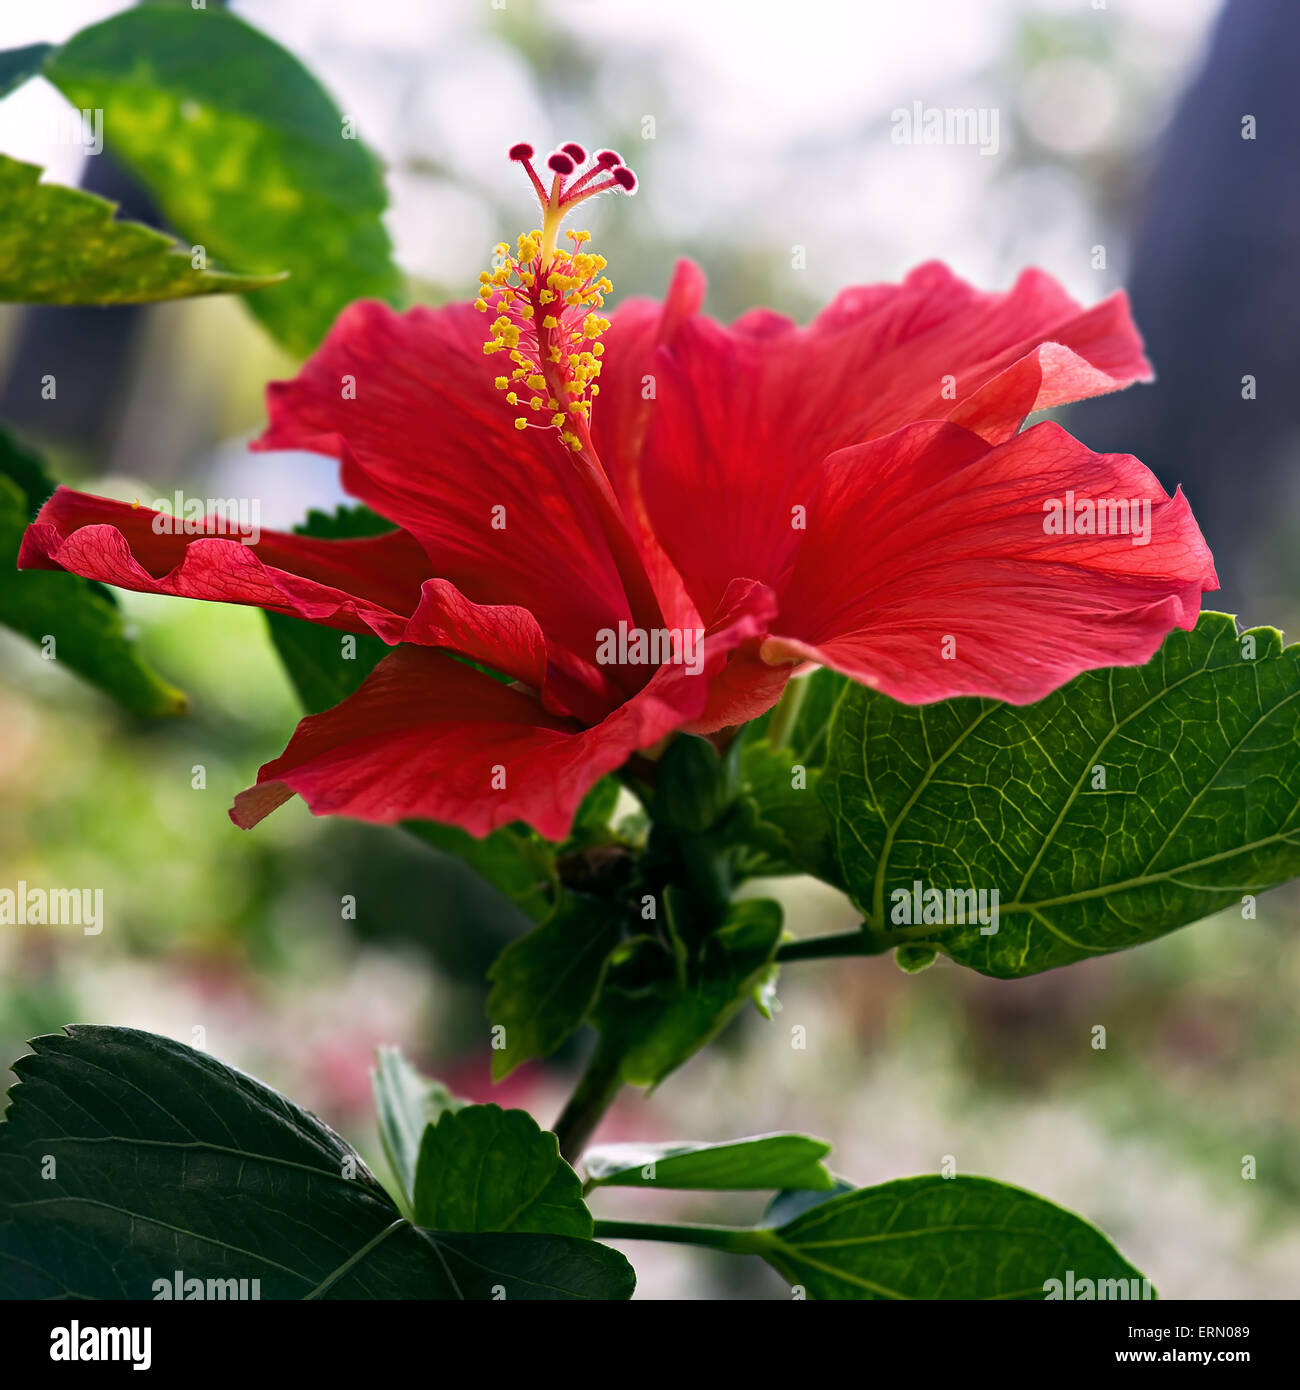 Hibiscus red flower close up single one square Stock Photo